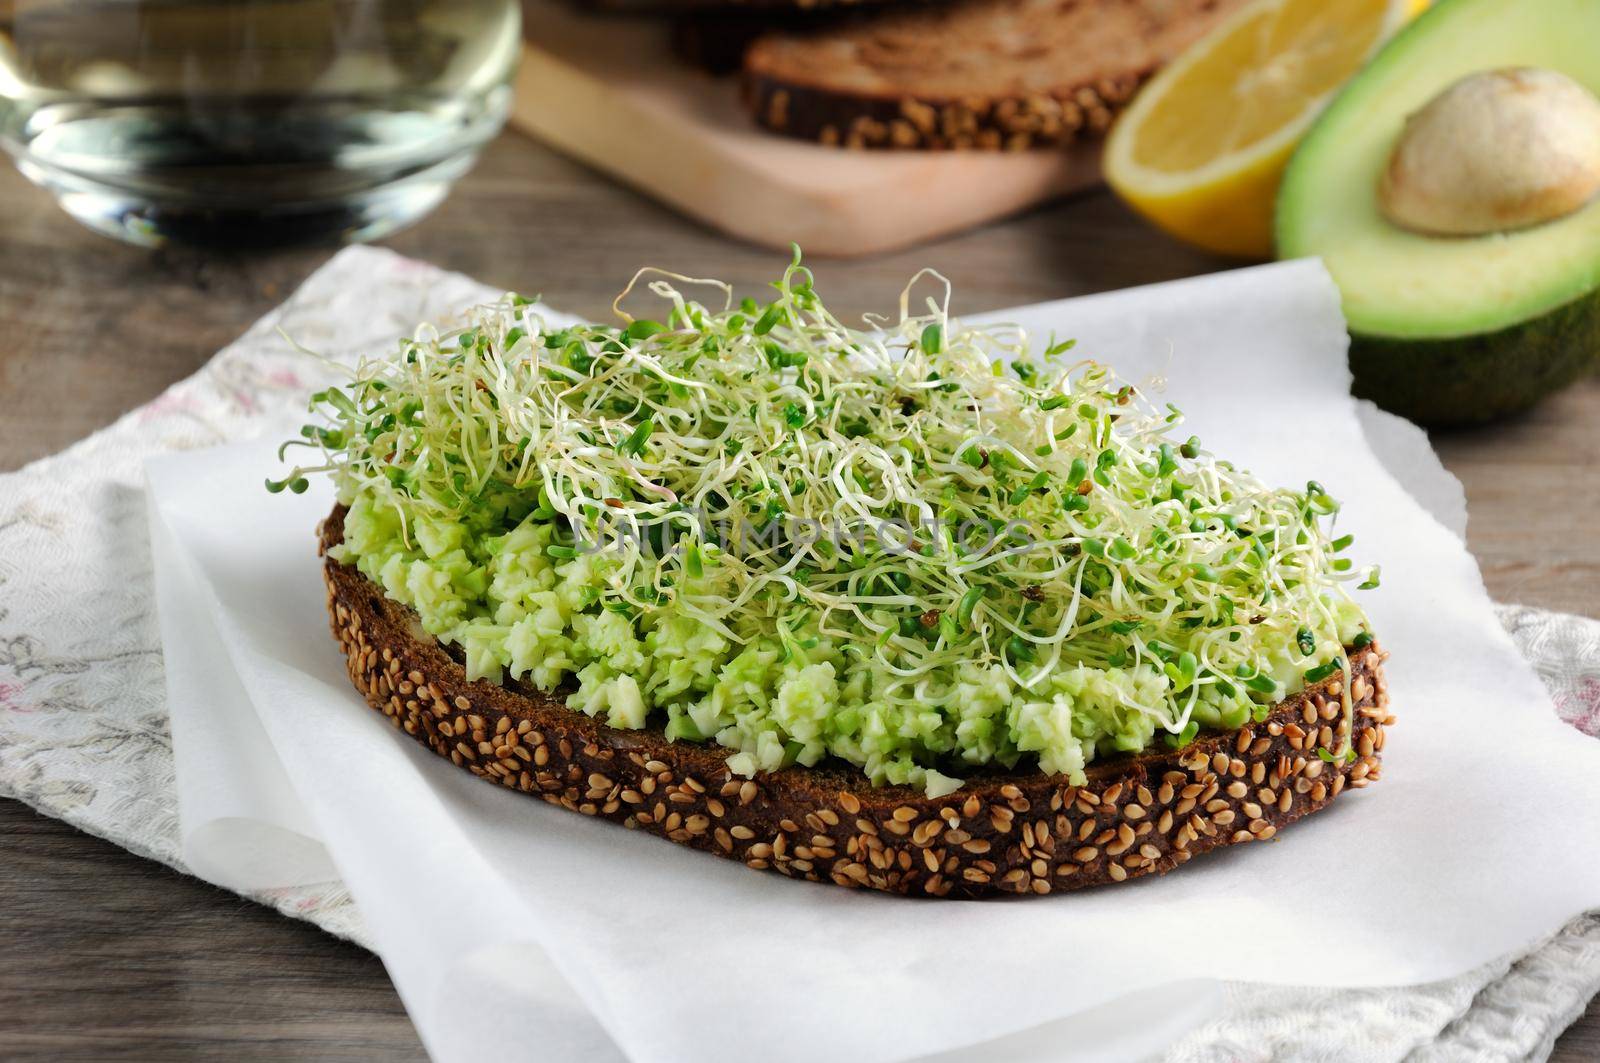 Sandwich with avocado and alfalfa sprouts by Apolonia